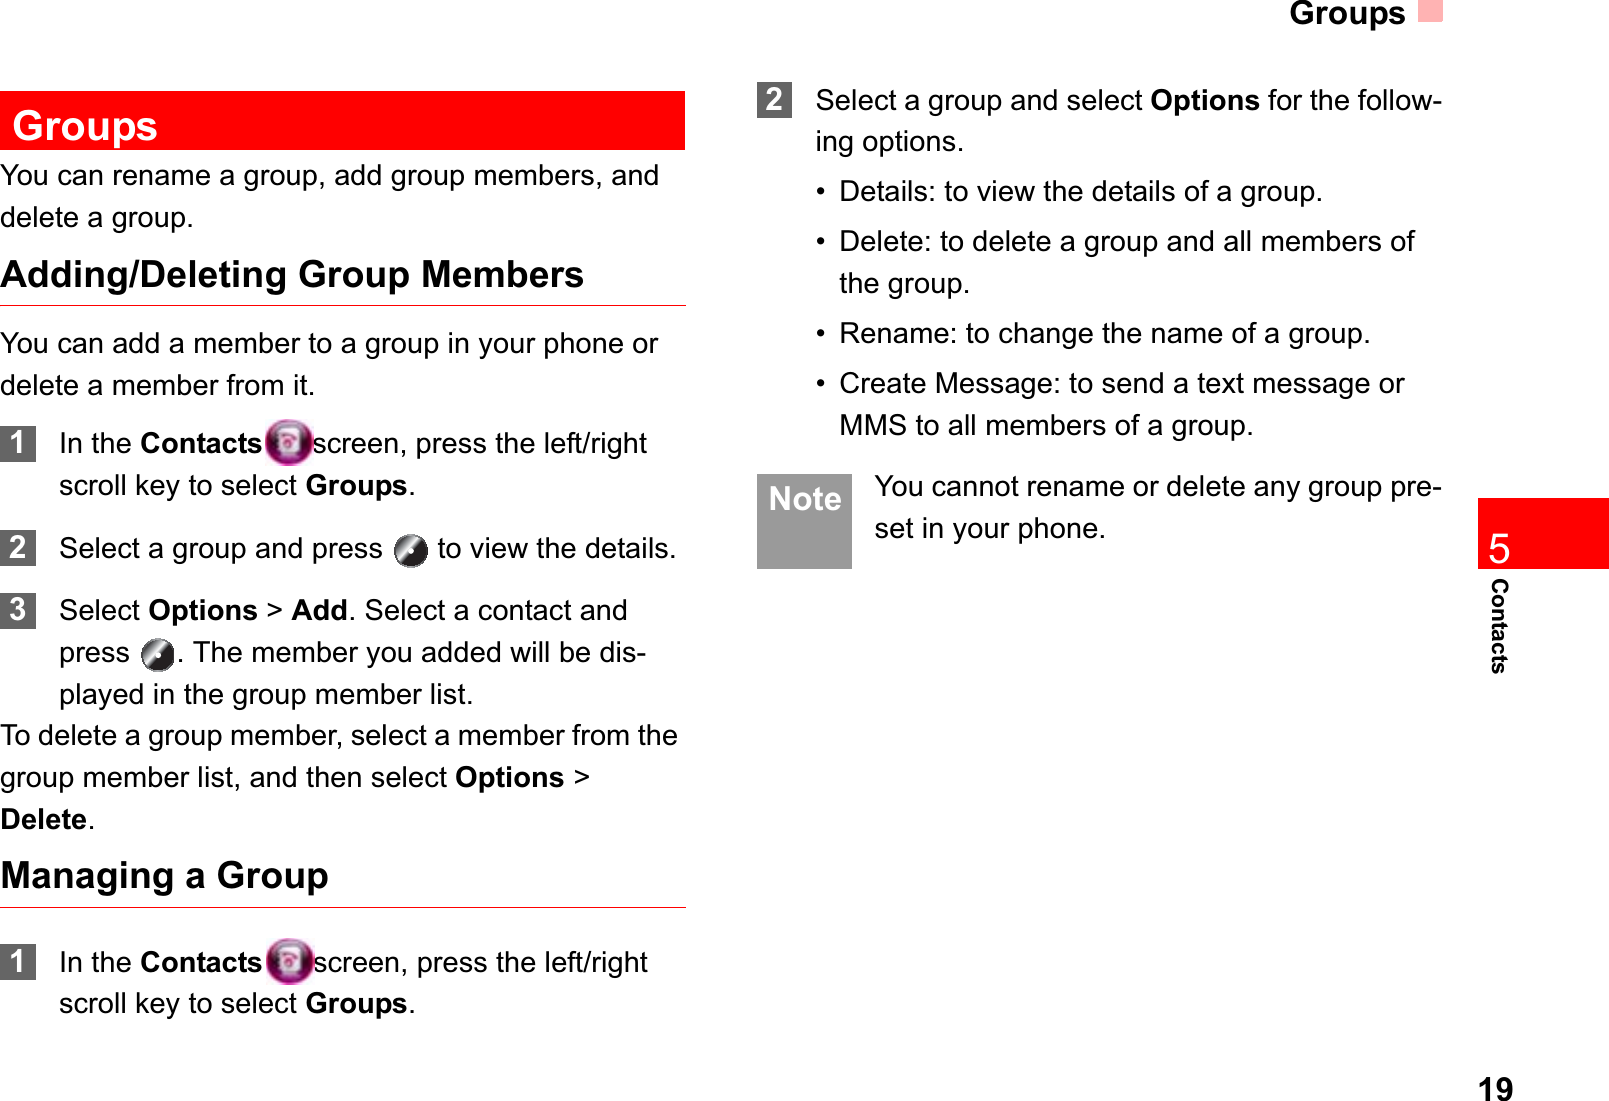 Groups19Contacts5GroupsYou can rename a group, add group members, and delete a group.Adding/Deleting Group MembersYou can add a member to a group in your phone or delete a member from it.1In the Contacts screen, press the left/right scroll key to select Groups.2Select a group and press   to view the details.3Select Options &gt;Add. Select a contact and press  . The member you added will be dis-played in the group member list.To delete a group member, select a member from the group member list, and then select Options &gt; Delete.Managing a Group1In the Contacts screen, press the left/right scroll key to select Groups.2Select a group and select Options for the follow-ing options.• Details: to view the details of a group.• Delete: to delete a group and all members of the group.• Rename: to change the name of a group.• Create Message: to send a text message or MMS to all members of a group. Note You cannot rename or delete any group pre-set in your phone.